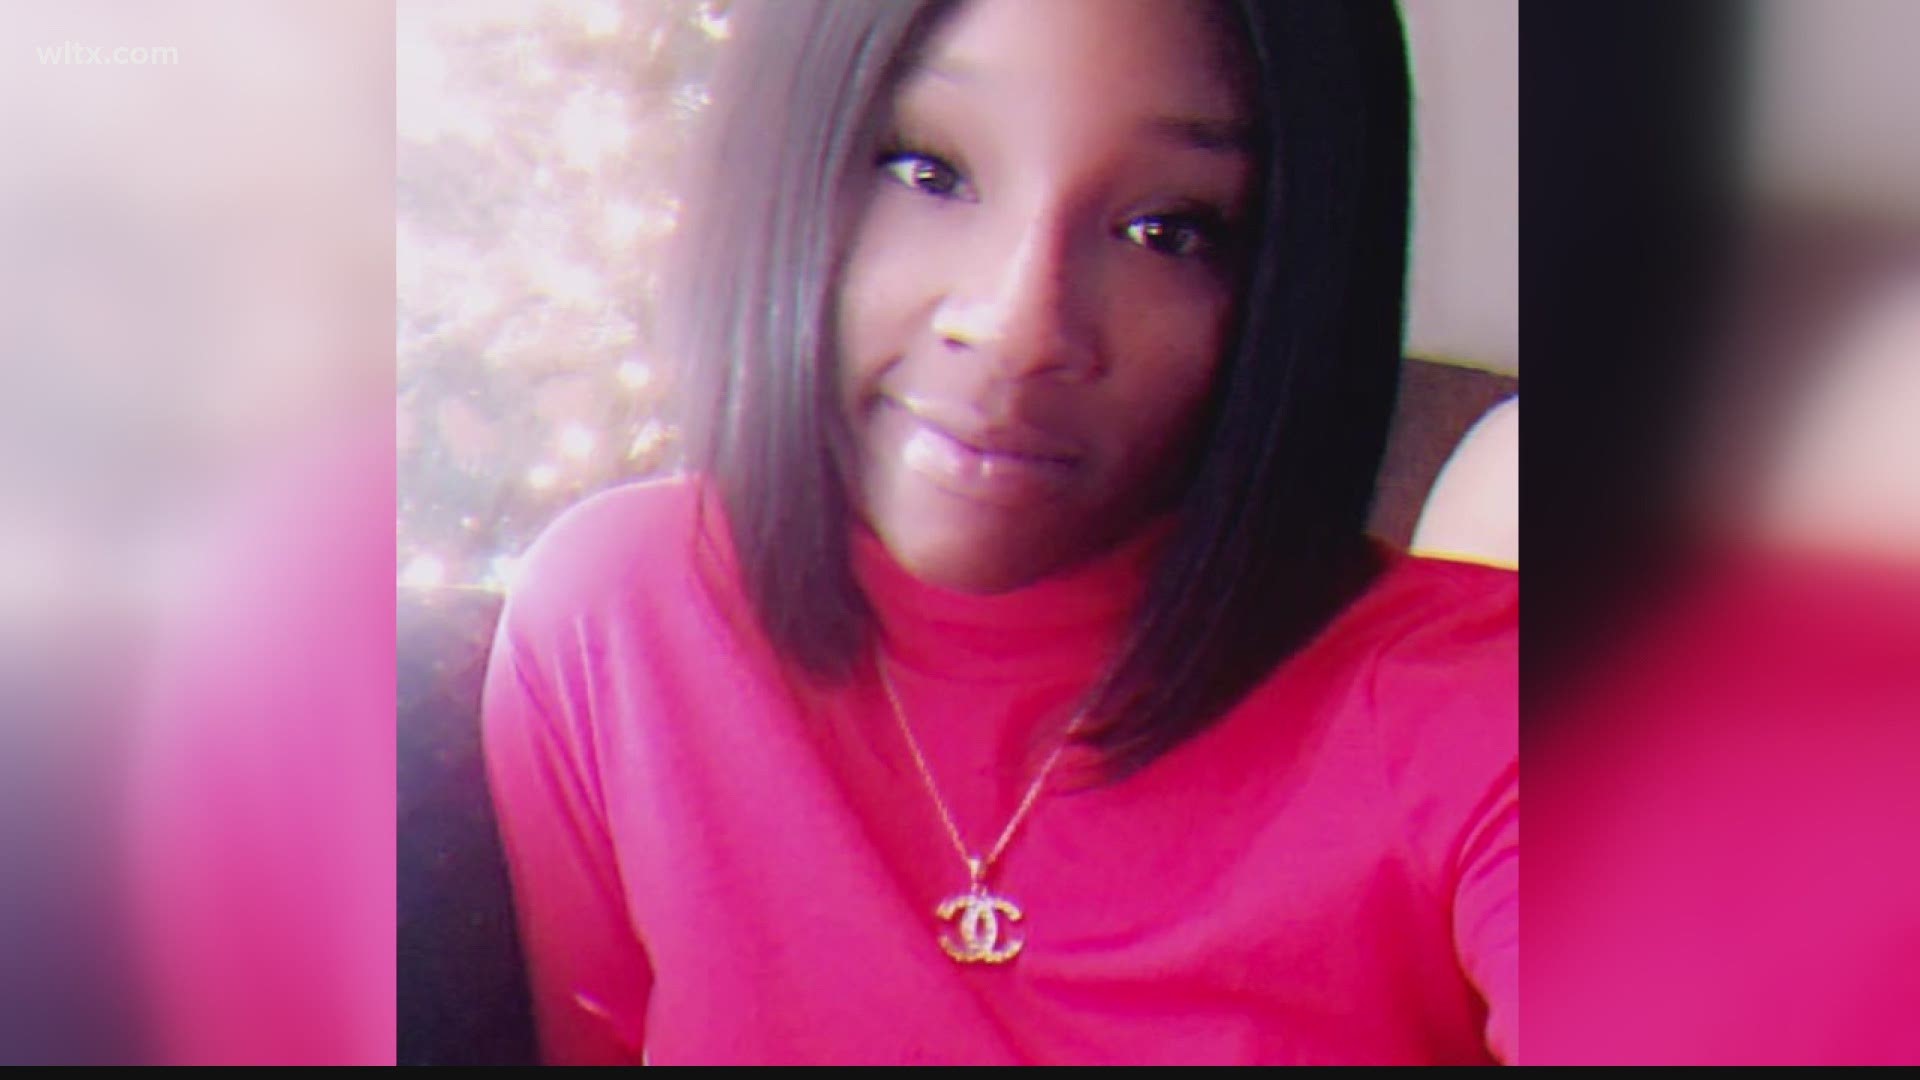 A Bishopville mother is calling for justice following her daughter's murder earlier this month in Lee County.